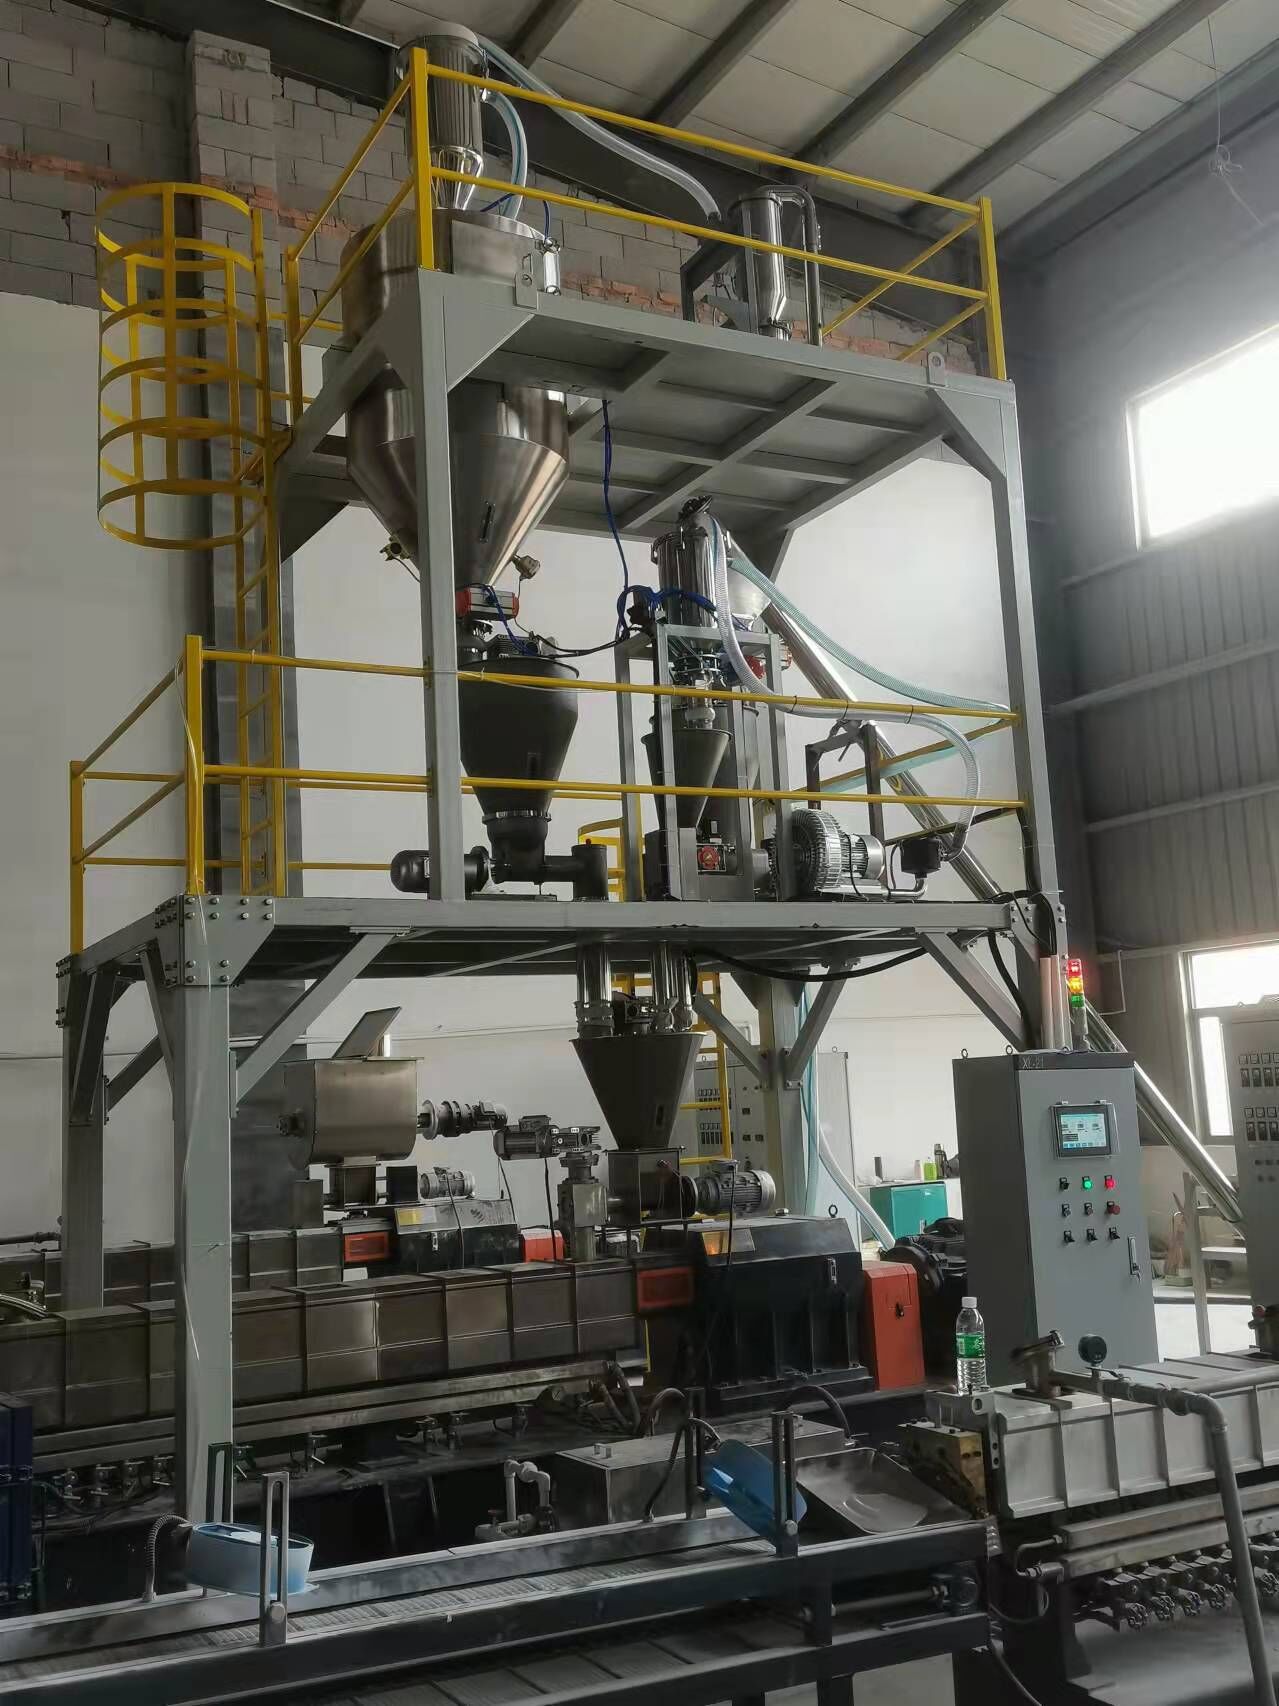 Bulk Bag discharge system for resins powder big bag filling station for Calcium carbonate powder AUTOMATIC VFFS PACKING MACHINE 1kg sugar granules containerised weighing and bagging machine 1 Ton Bulk